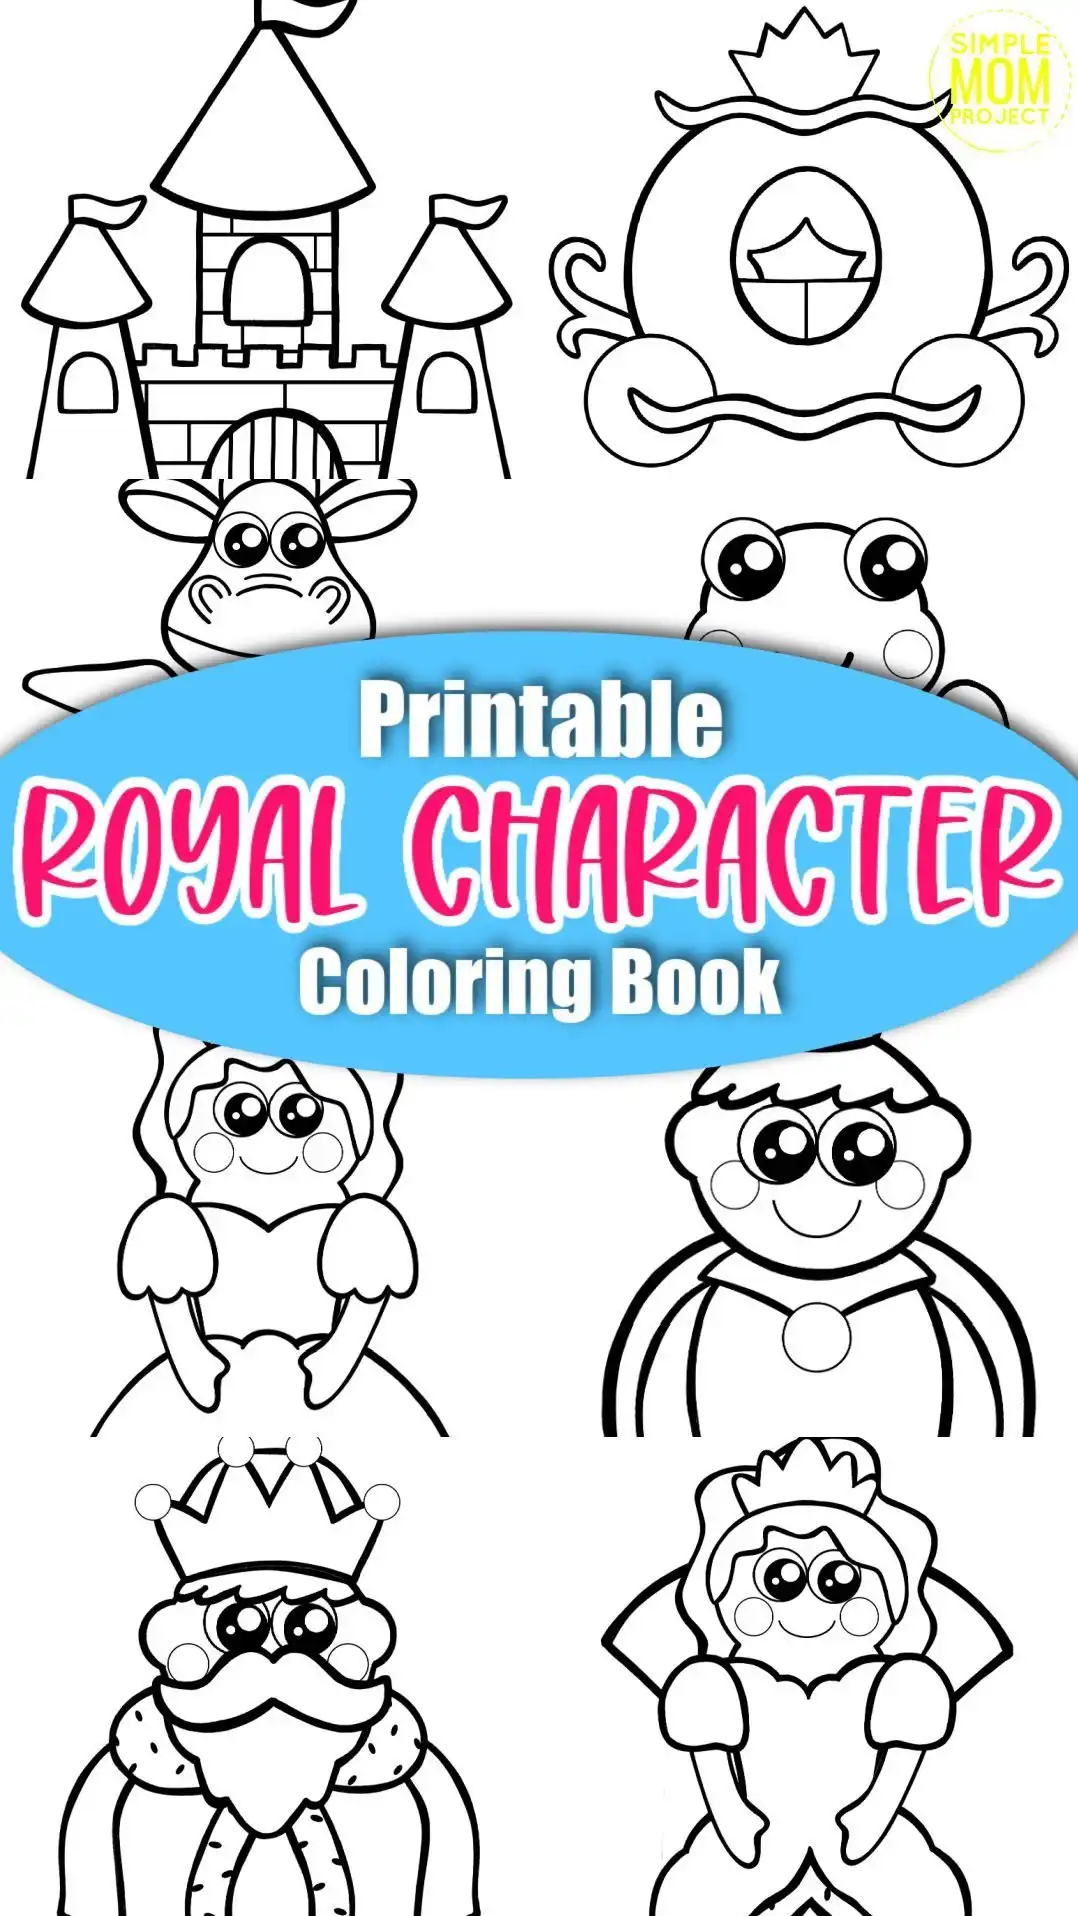 Printable storybook character templates â simple mom project